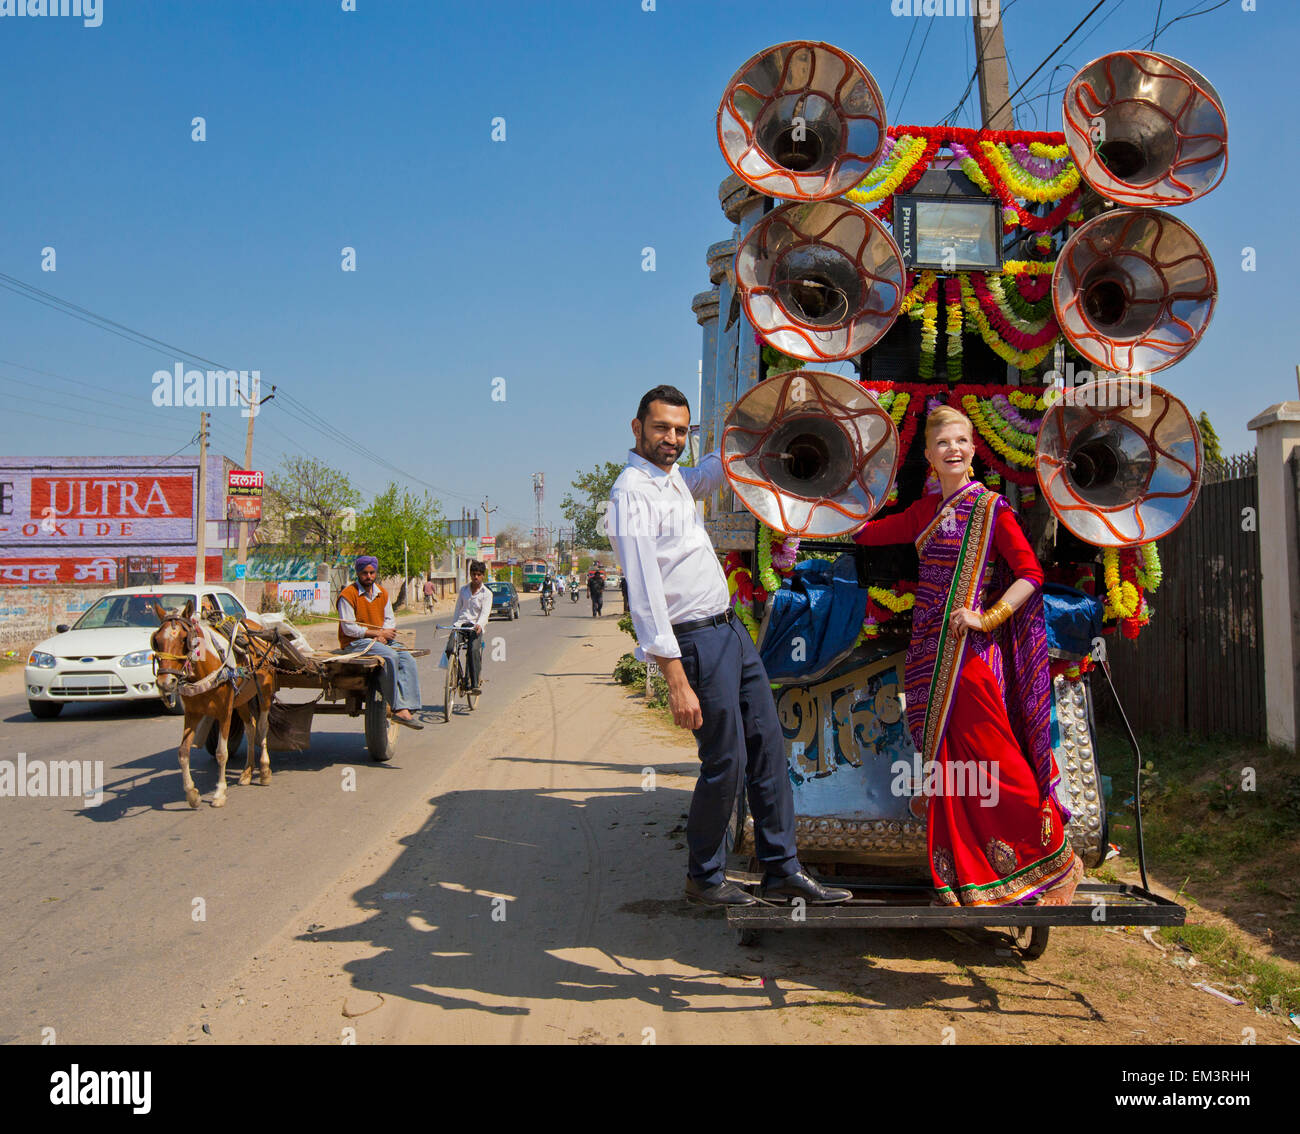 A Mixed Race Couple Stands On The Back Of A Decorated Cart On The Side Of The Road; Ludhiana, Punjab, India Stock Photo